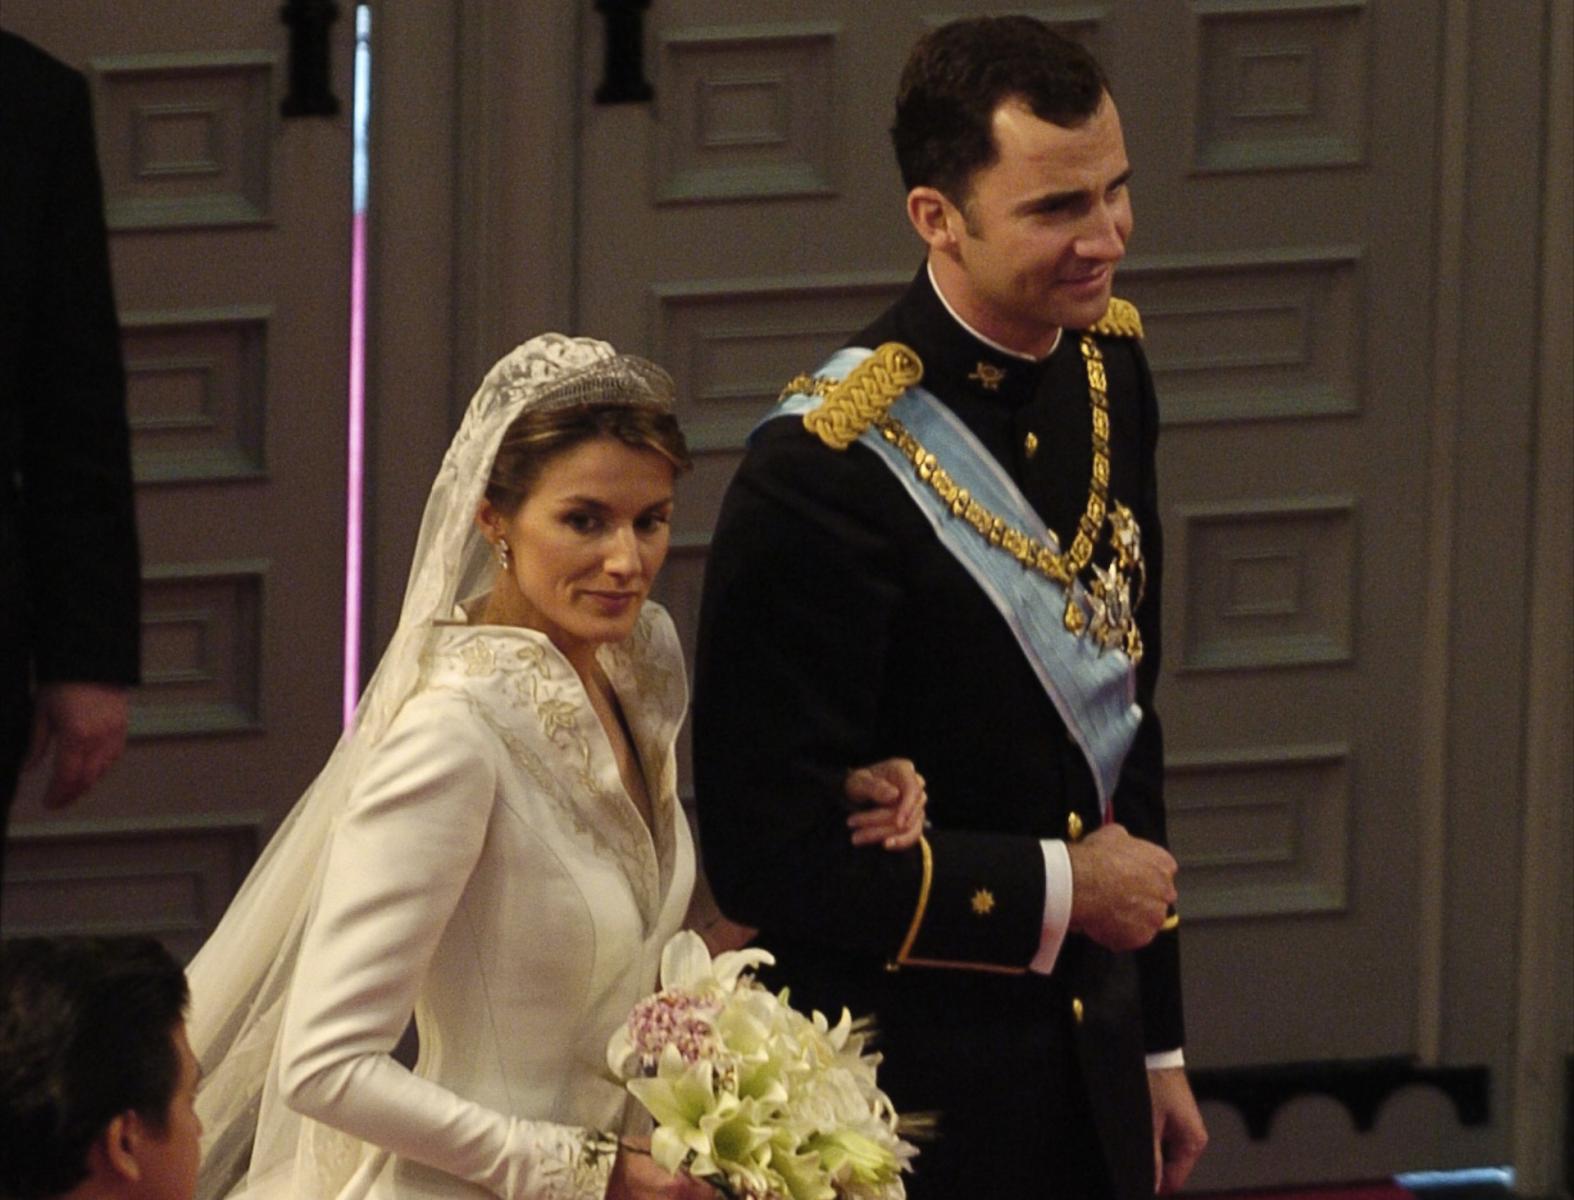 These 6 Royal Weddings Will Leave You Speechless (and Maybe a Little Envious) - image 3